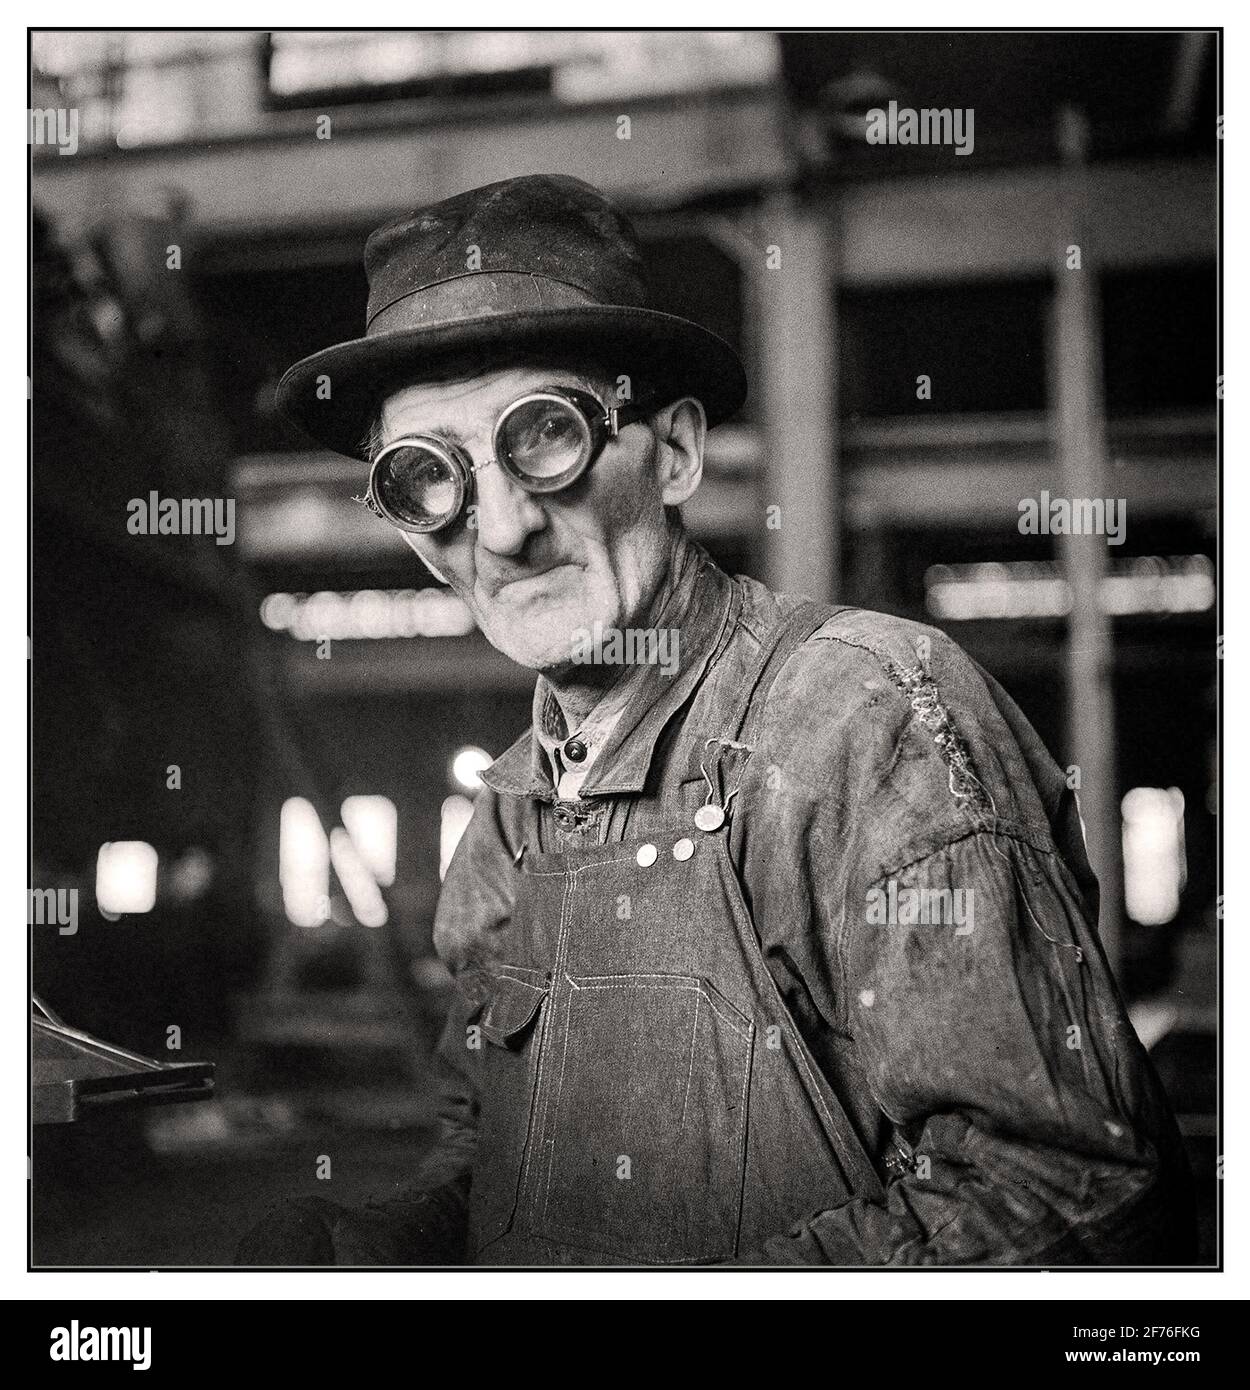 December 1942 War Worker WW2. “Chicago, Illinois. Workman grinding out a small part at the Chicago & North Western repair shops.” Medium-format negative by Jack Delano for the Office of War Information. America War Production World War II Stock Photo